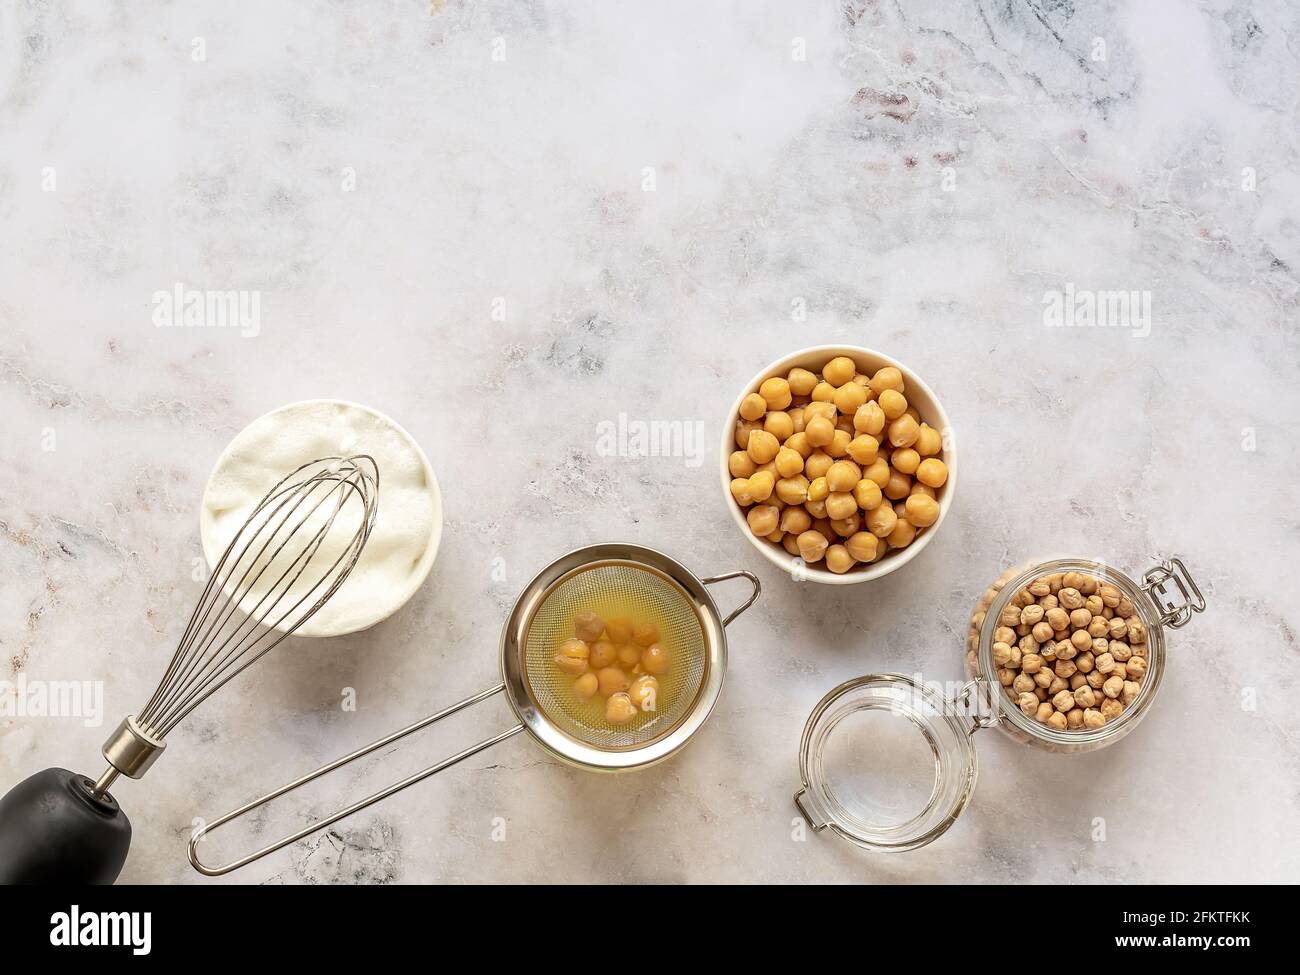 Chickpea Water Aquafaba Egg Substitutes Vegan Sustainable Lifestyle And Natural Eco Friendly Products Stock Photo Alamy